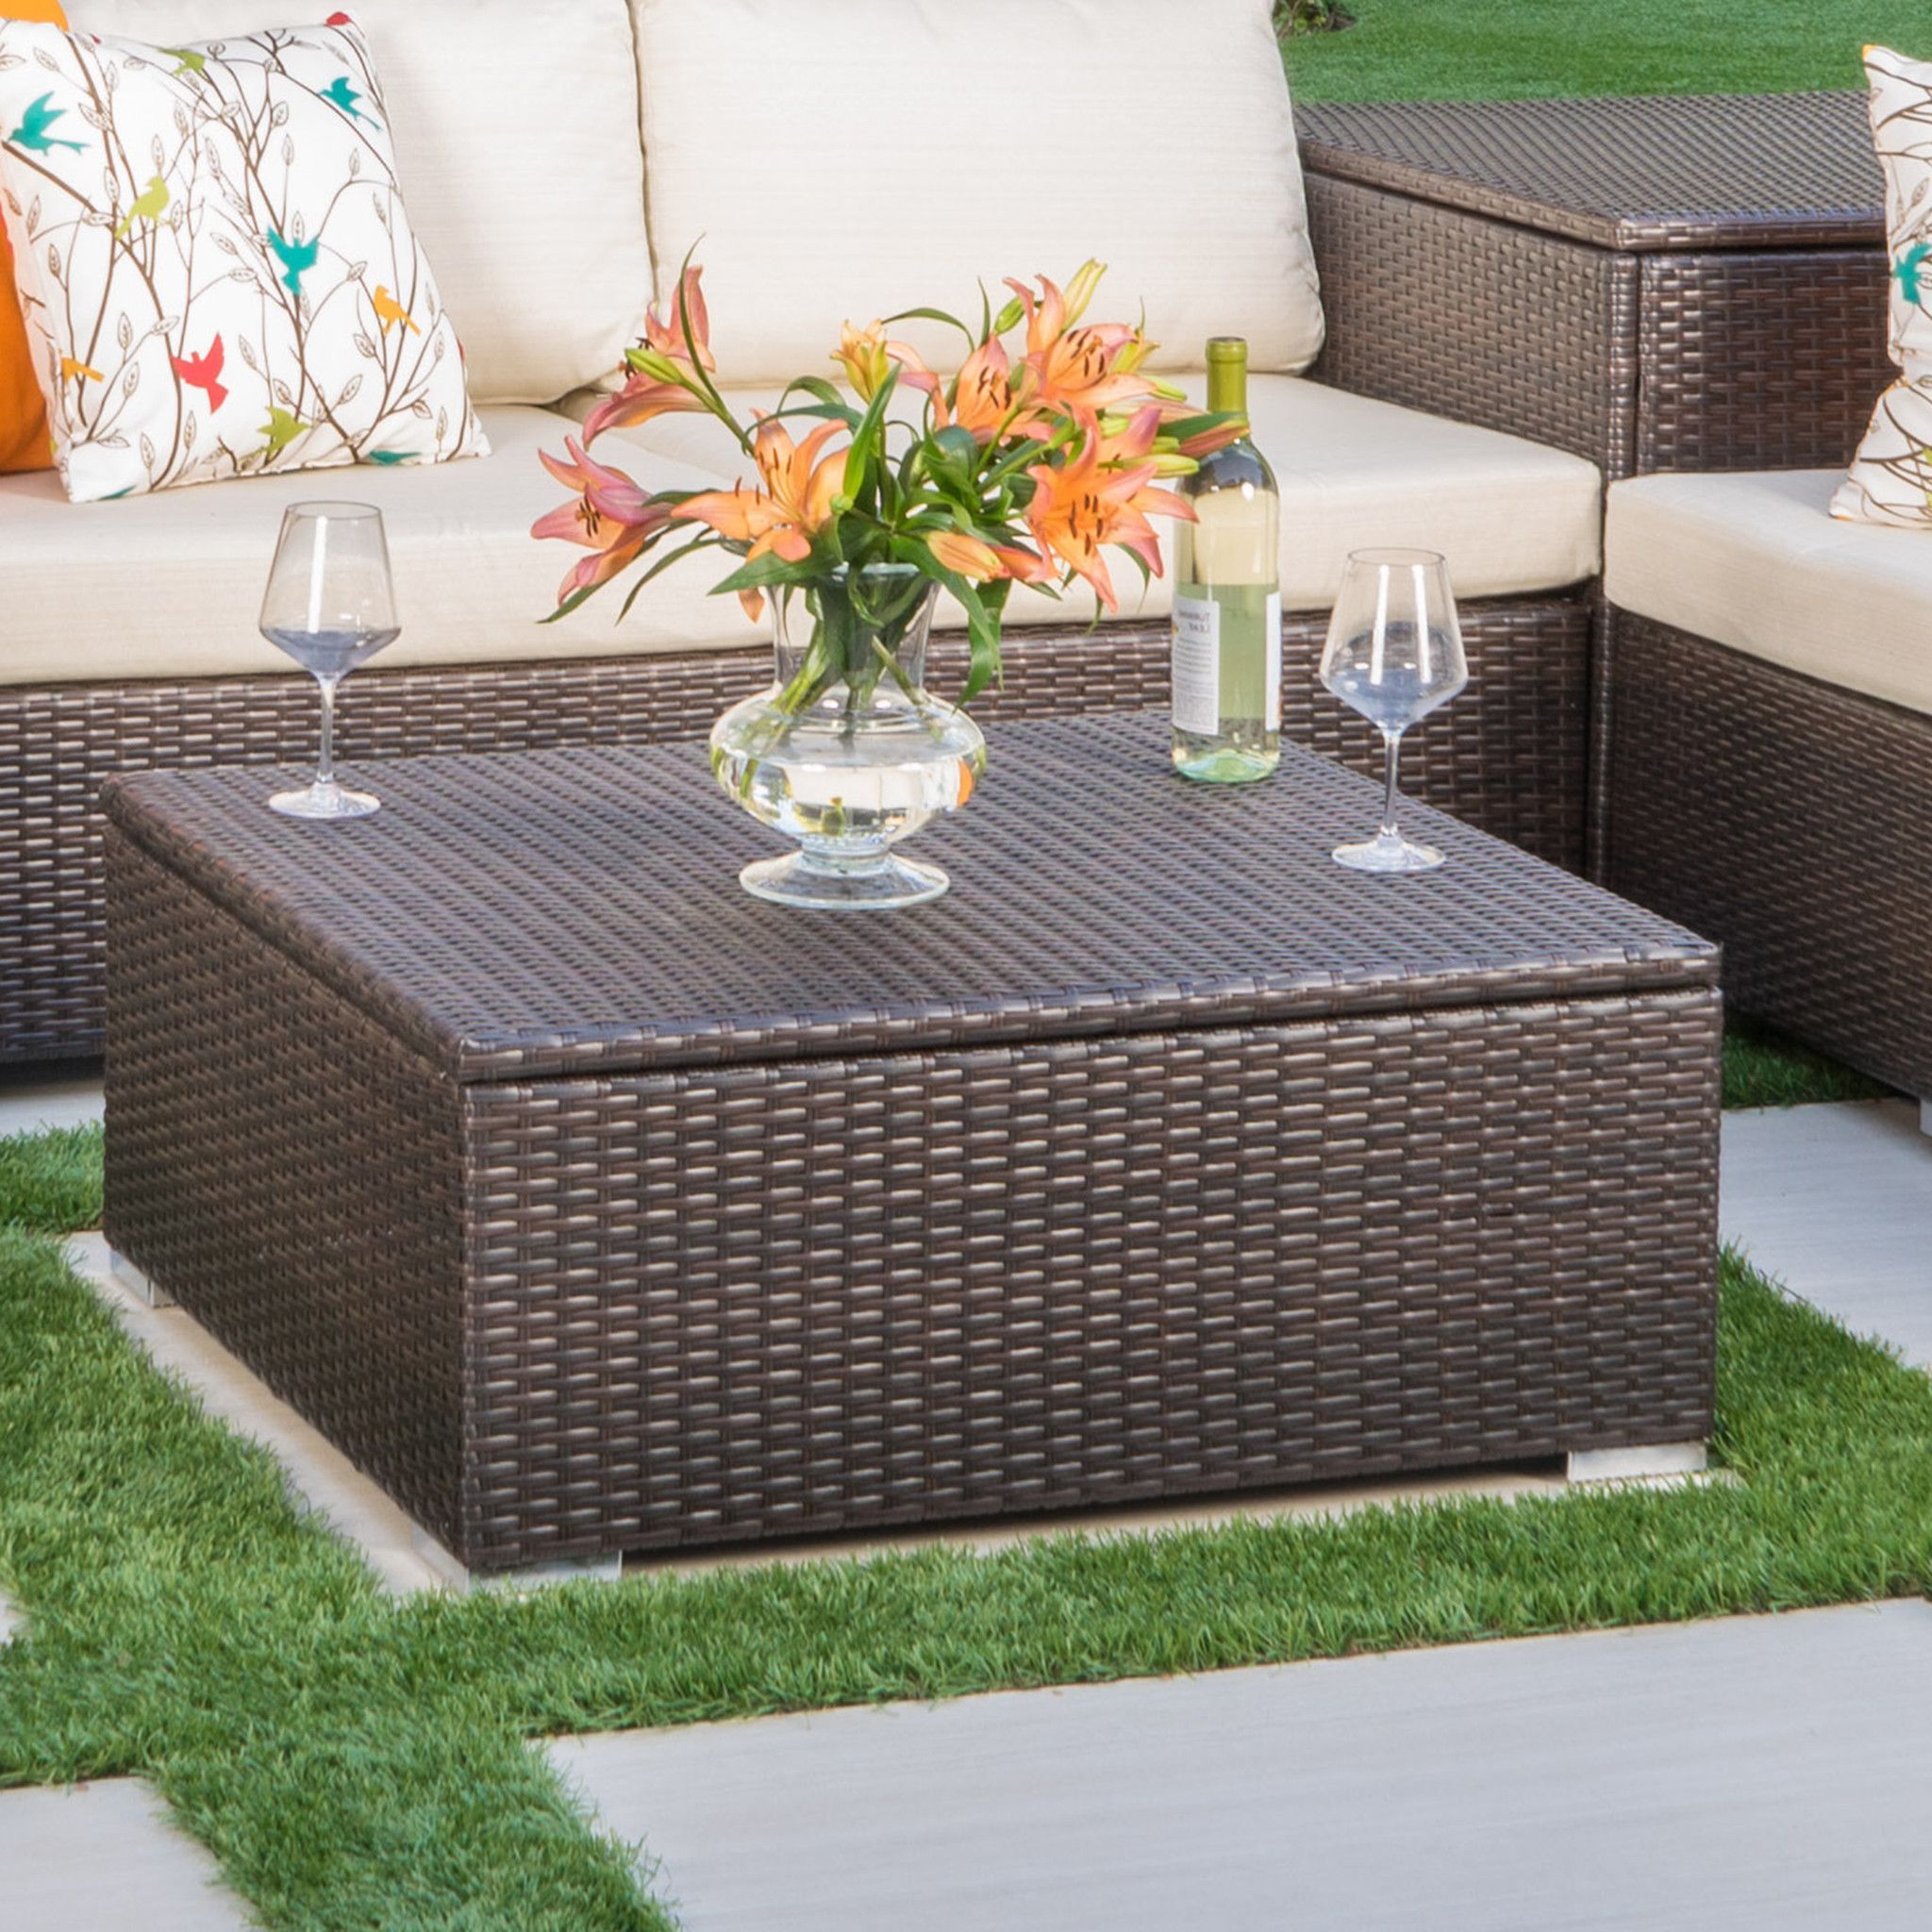 San Louis Obispo Outdoor Wicker Storage Coffee Table Coffee Table Cover Throughout Waterproof Coffee Tables (Gallery 7 of 20)